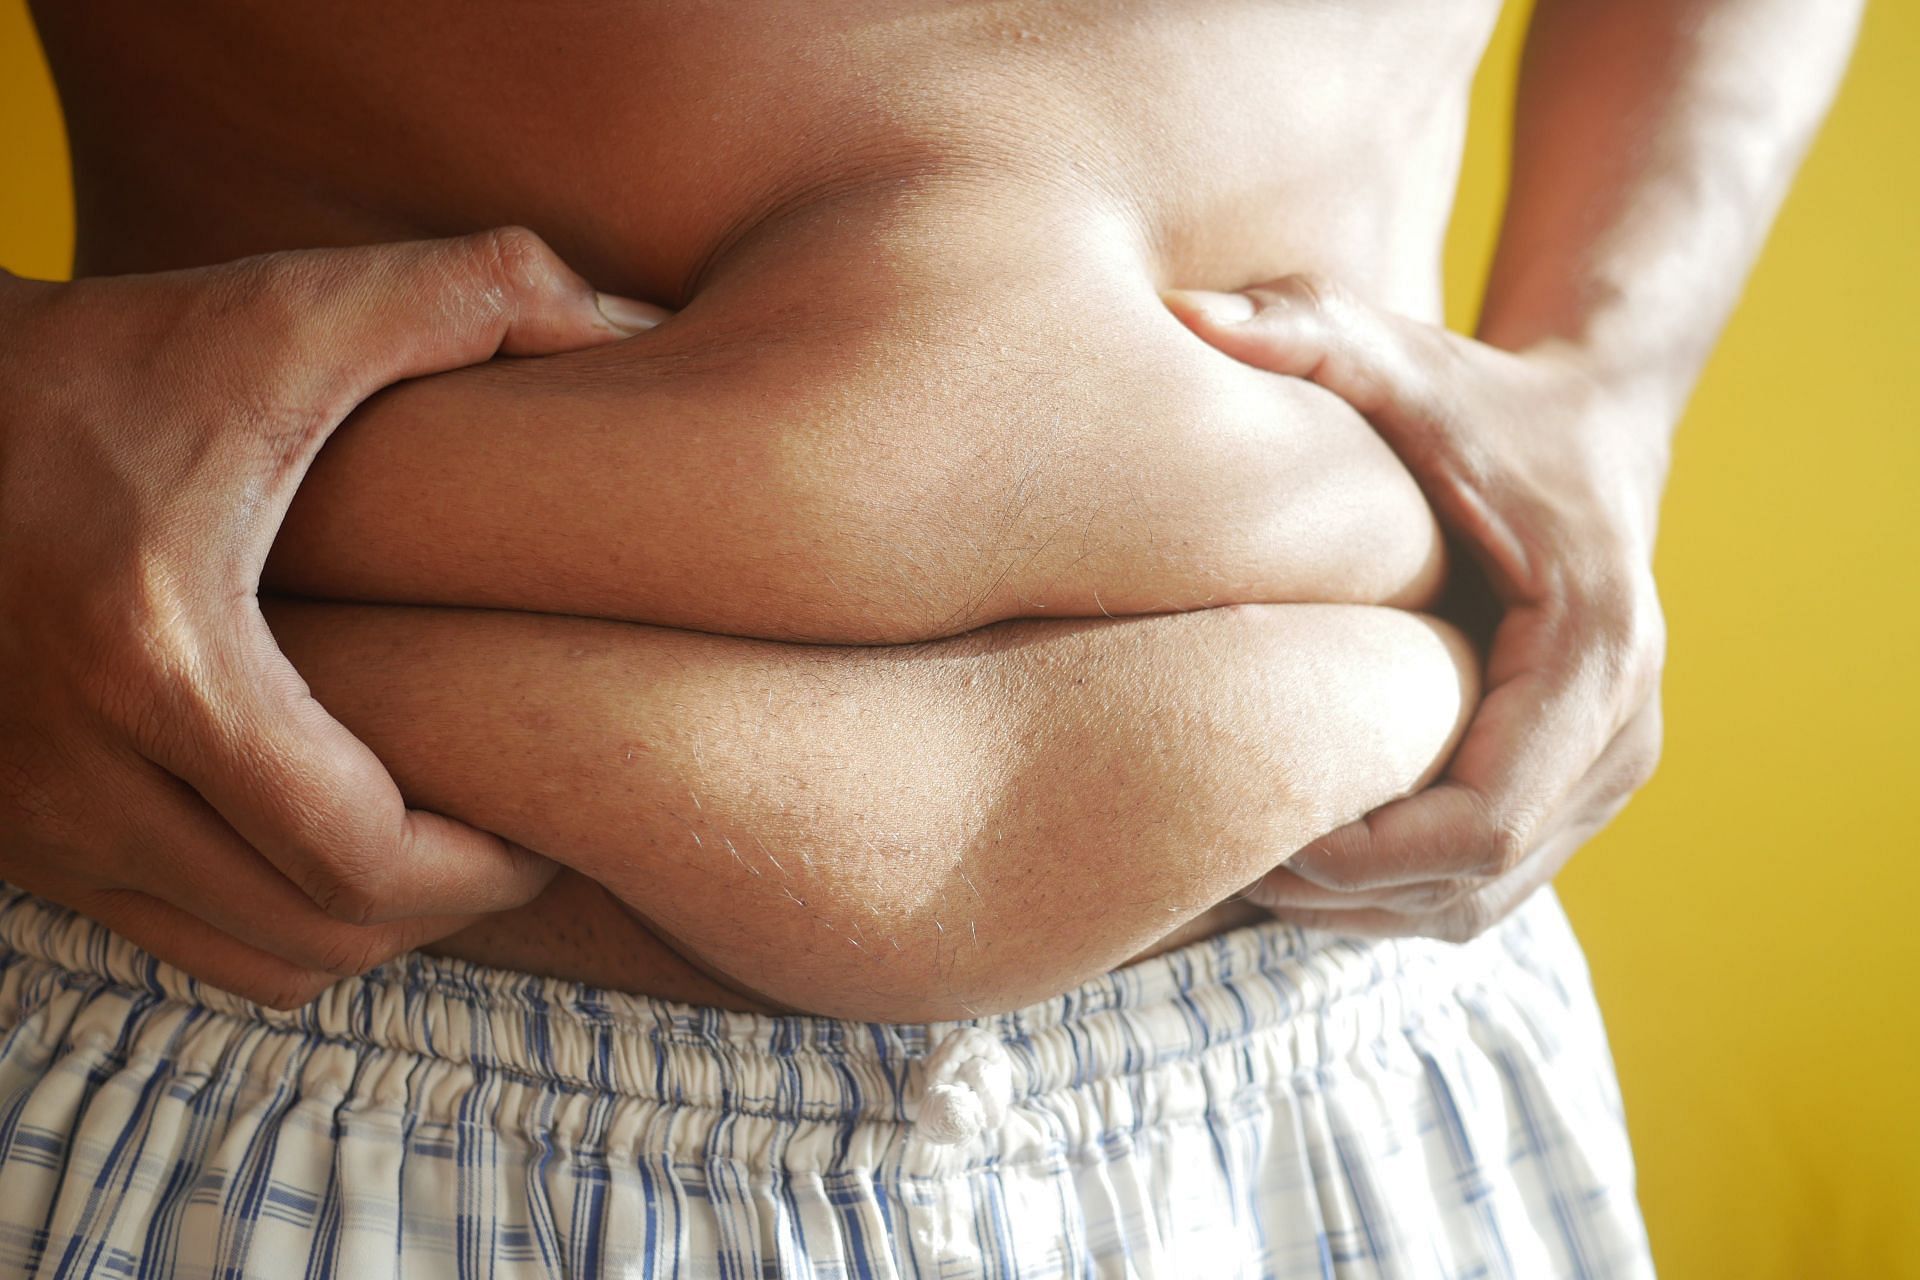 Benefits of weight loss (image sourced via Pexels / Photo by towfiqu)